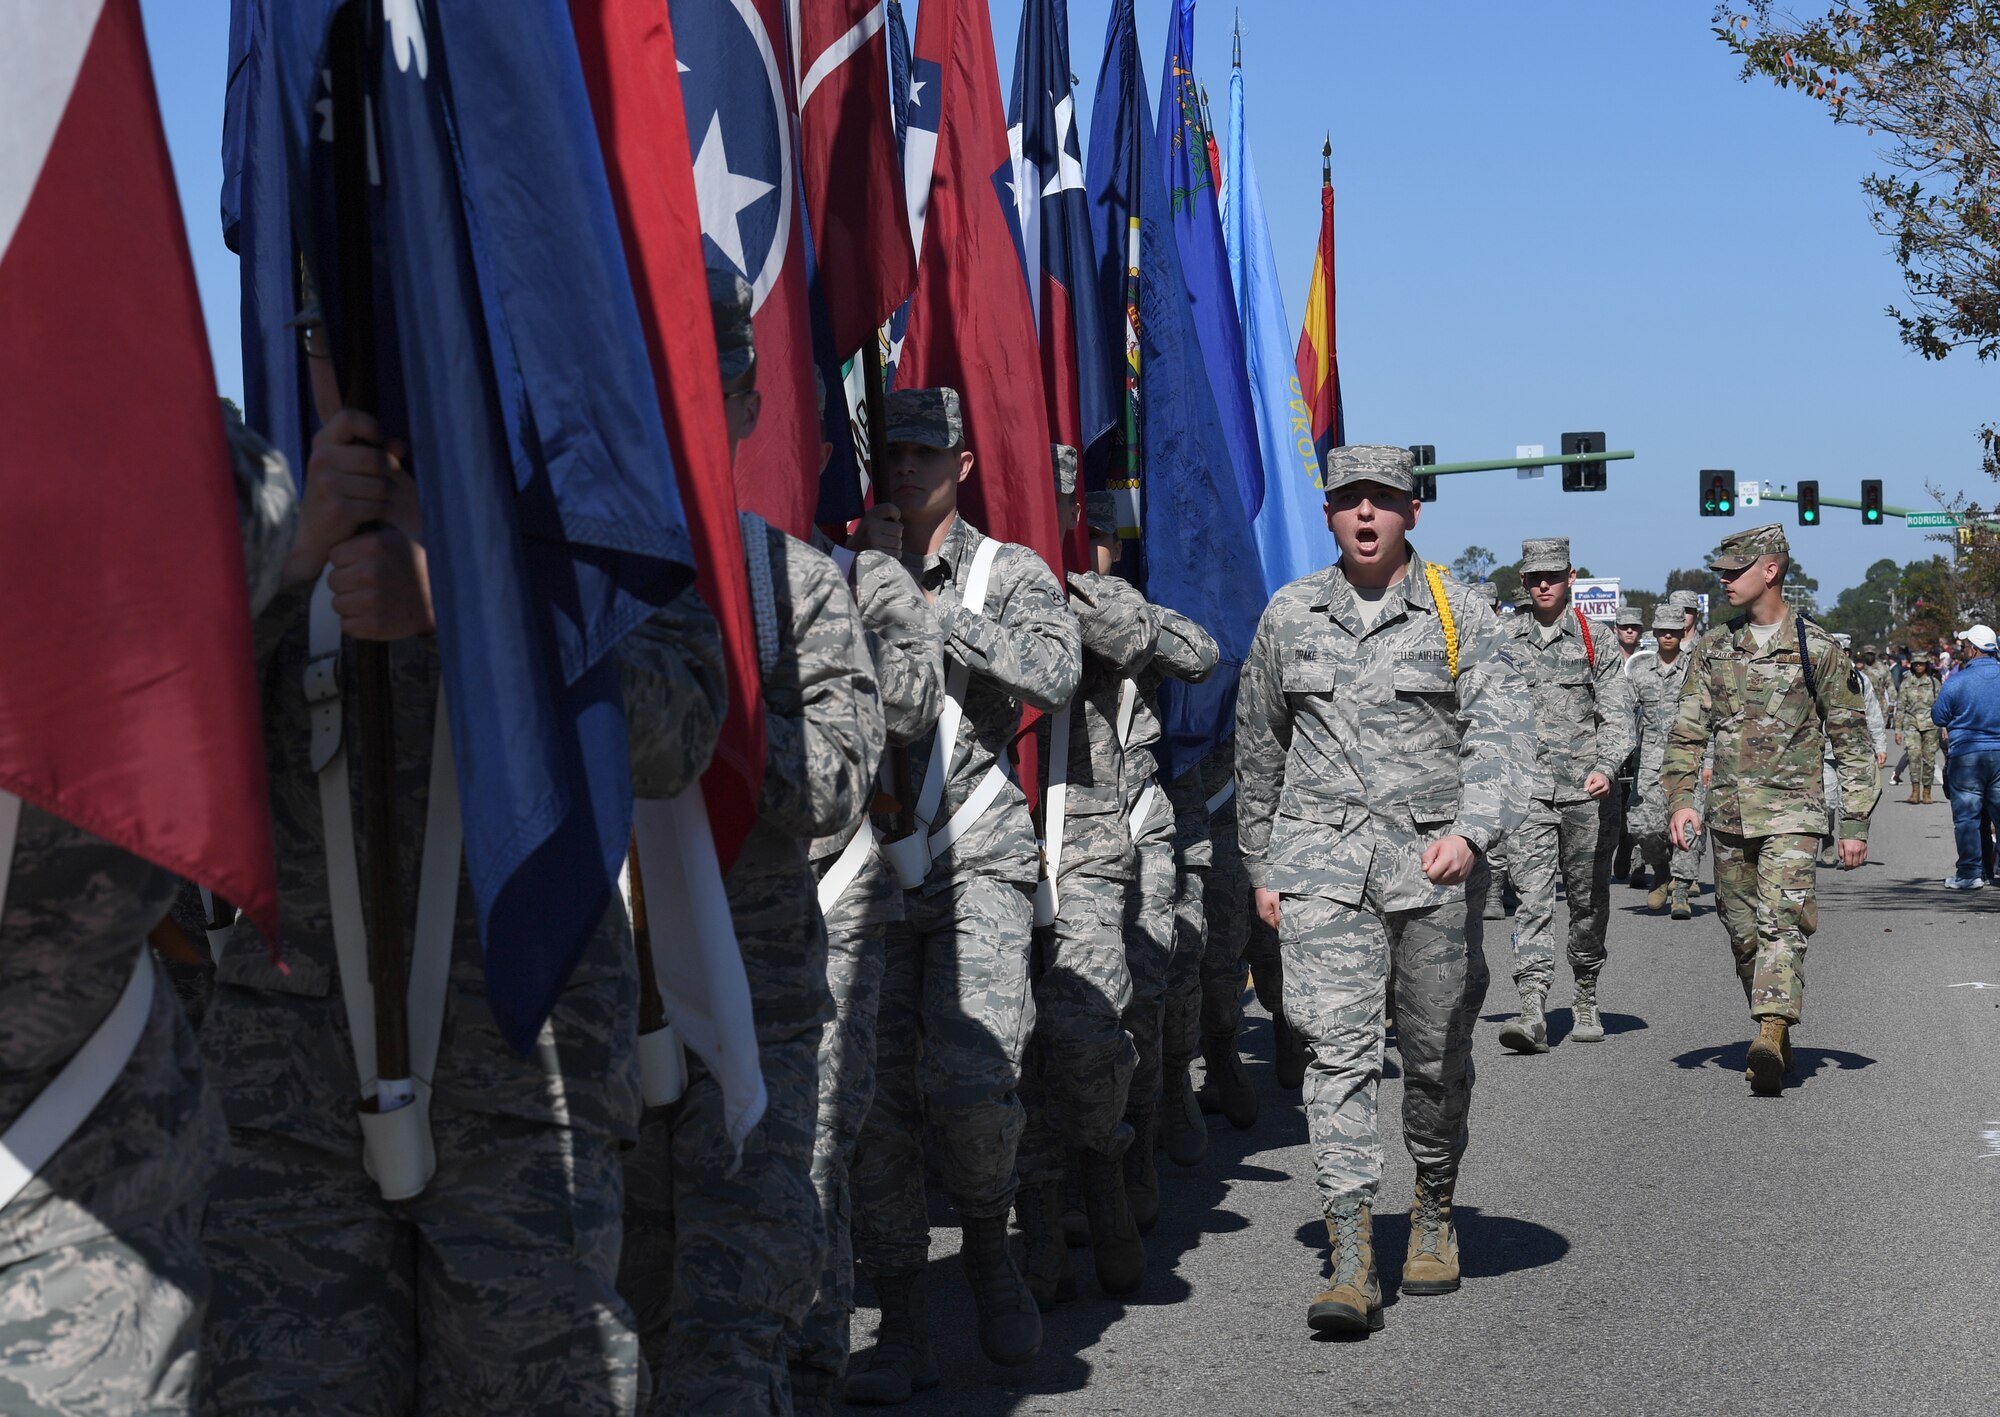 Airmen from the 81st Training Group carrying the 50 state flags march in the 19th Annual Gulf Coast Veterans Day Parade in DíIberville, Mississippi, Nov. 9, 2019. Keesler Air Force Base leadership, along with hundreds of Airmen, attended and participated in the parade in support of all veterans past and present. More than 70 unique floats, marching bands and military units marched in the largest Veterans Day parade on the Gulf Coast. (U.S. Air Force photo by Kemberly Groue)